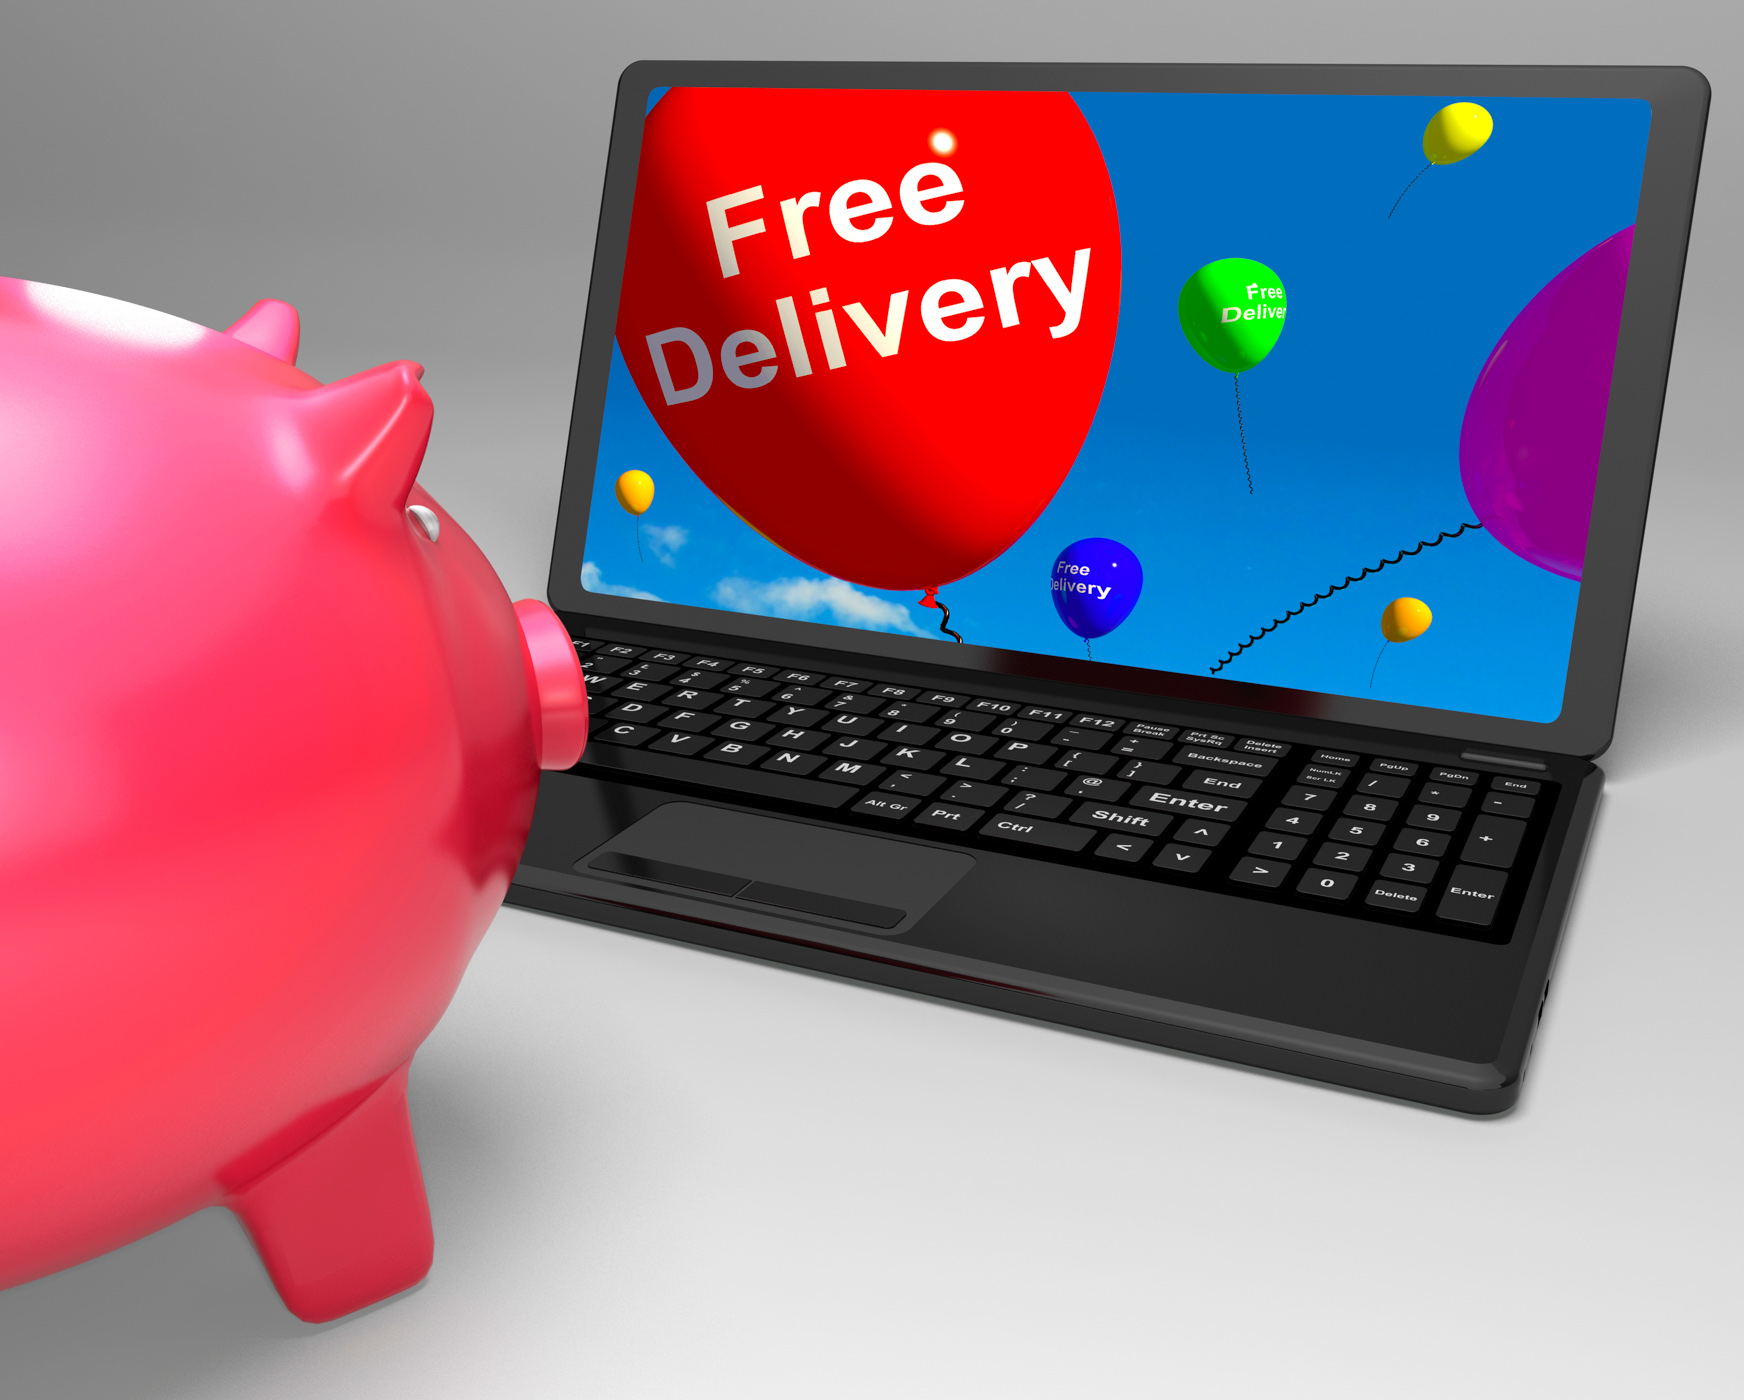 Free delivery on laptop showing free shipping photo